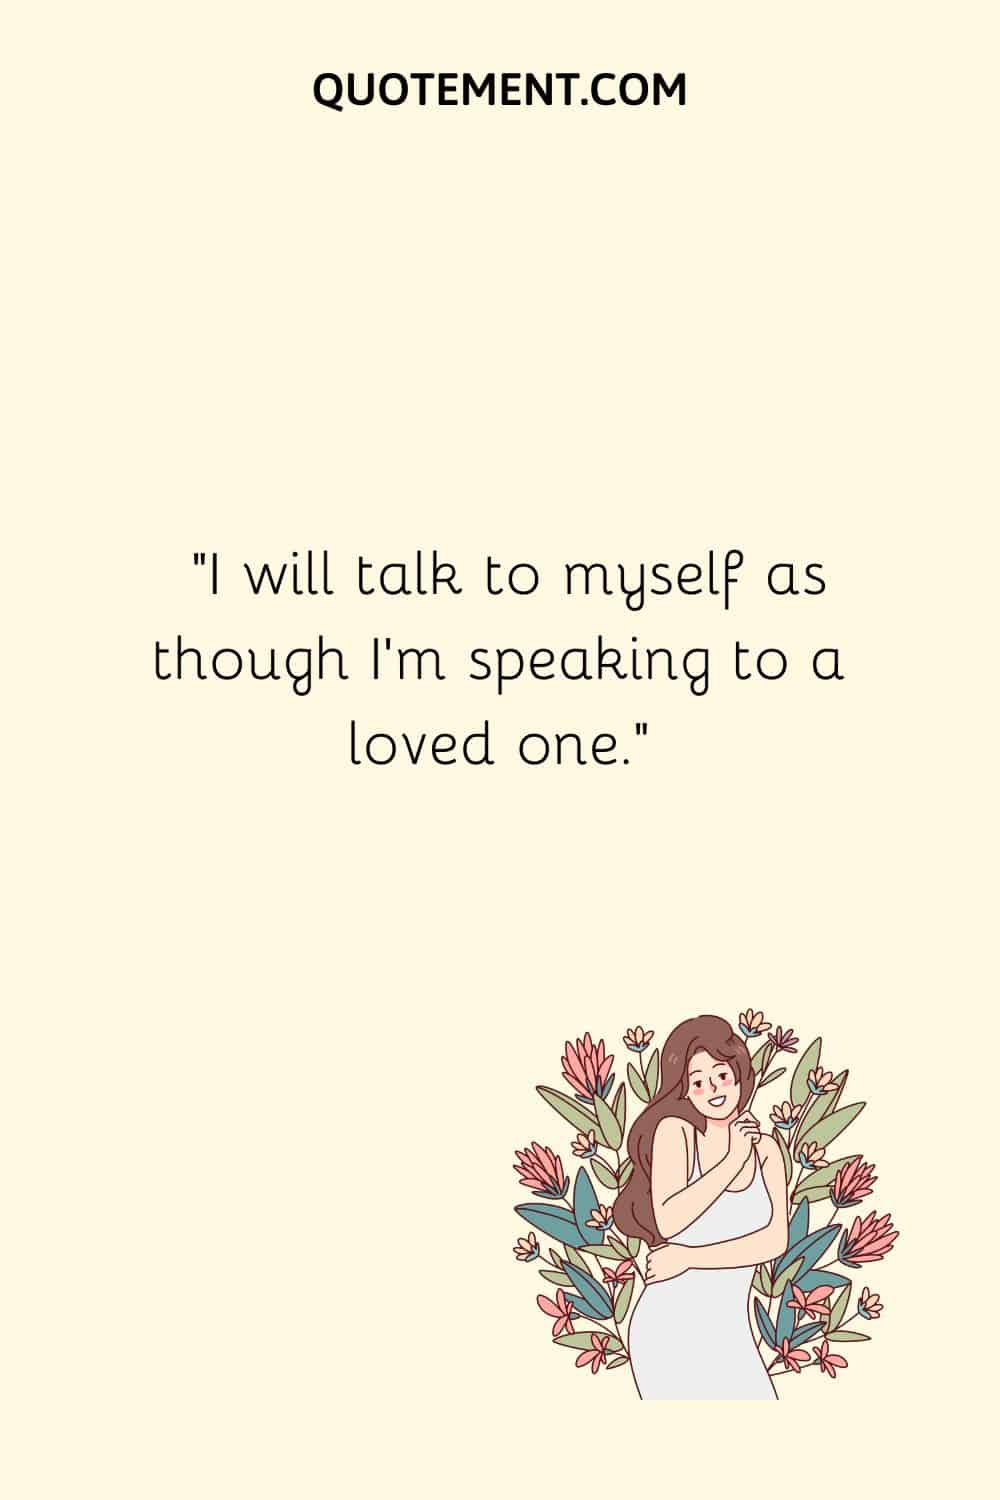 I will talk to myself as though I’m speaking to a loved one